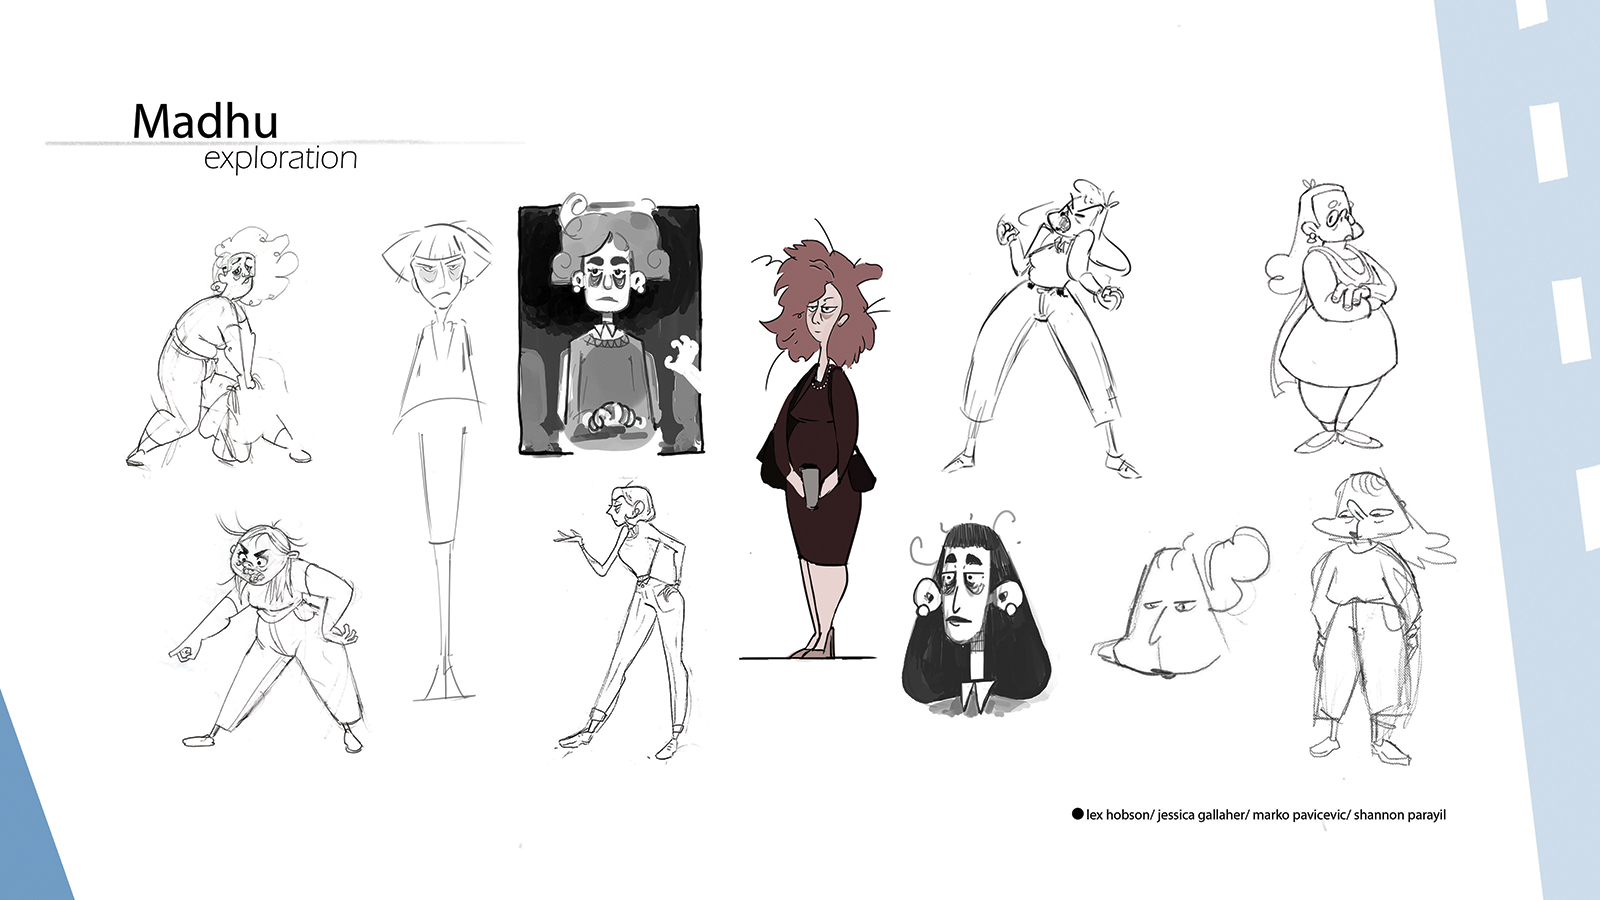 Concepts and sketches for Flap character Madhu.